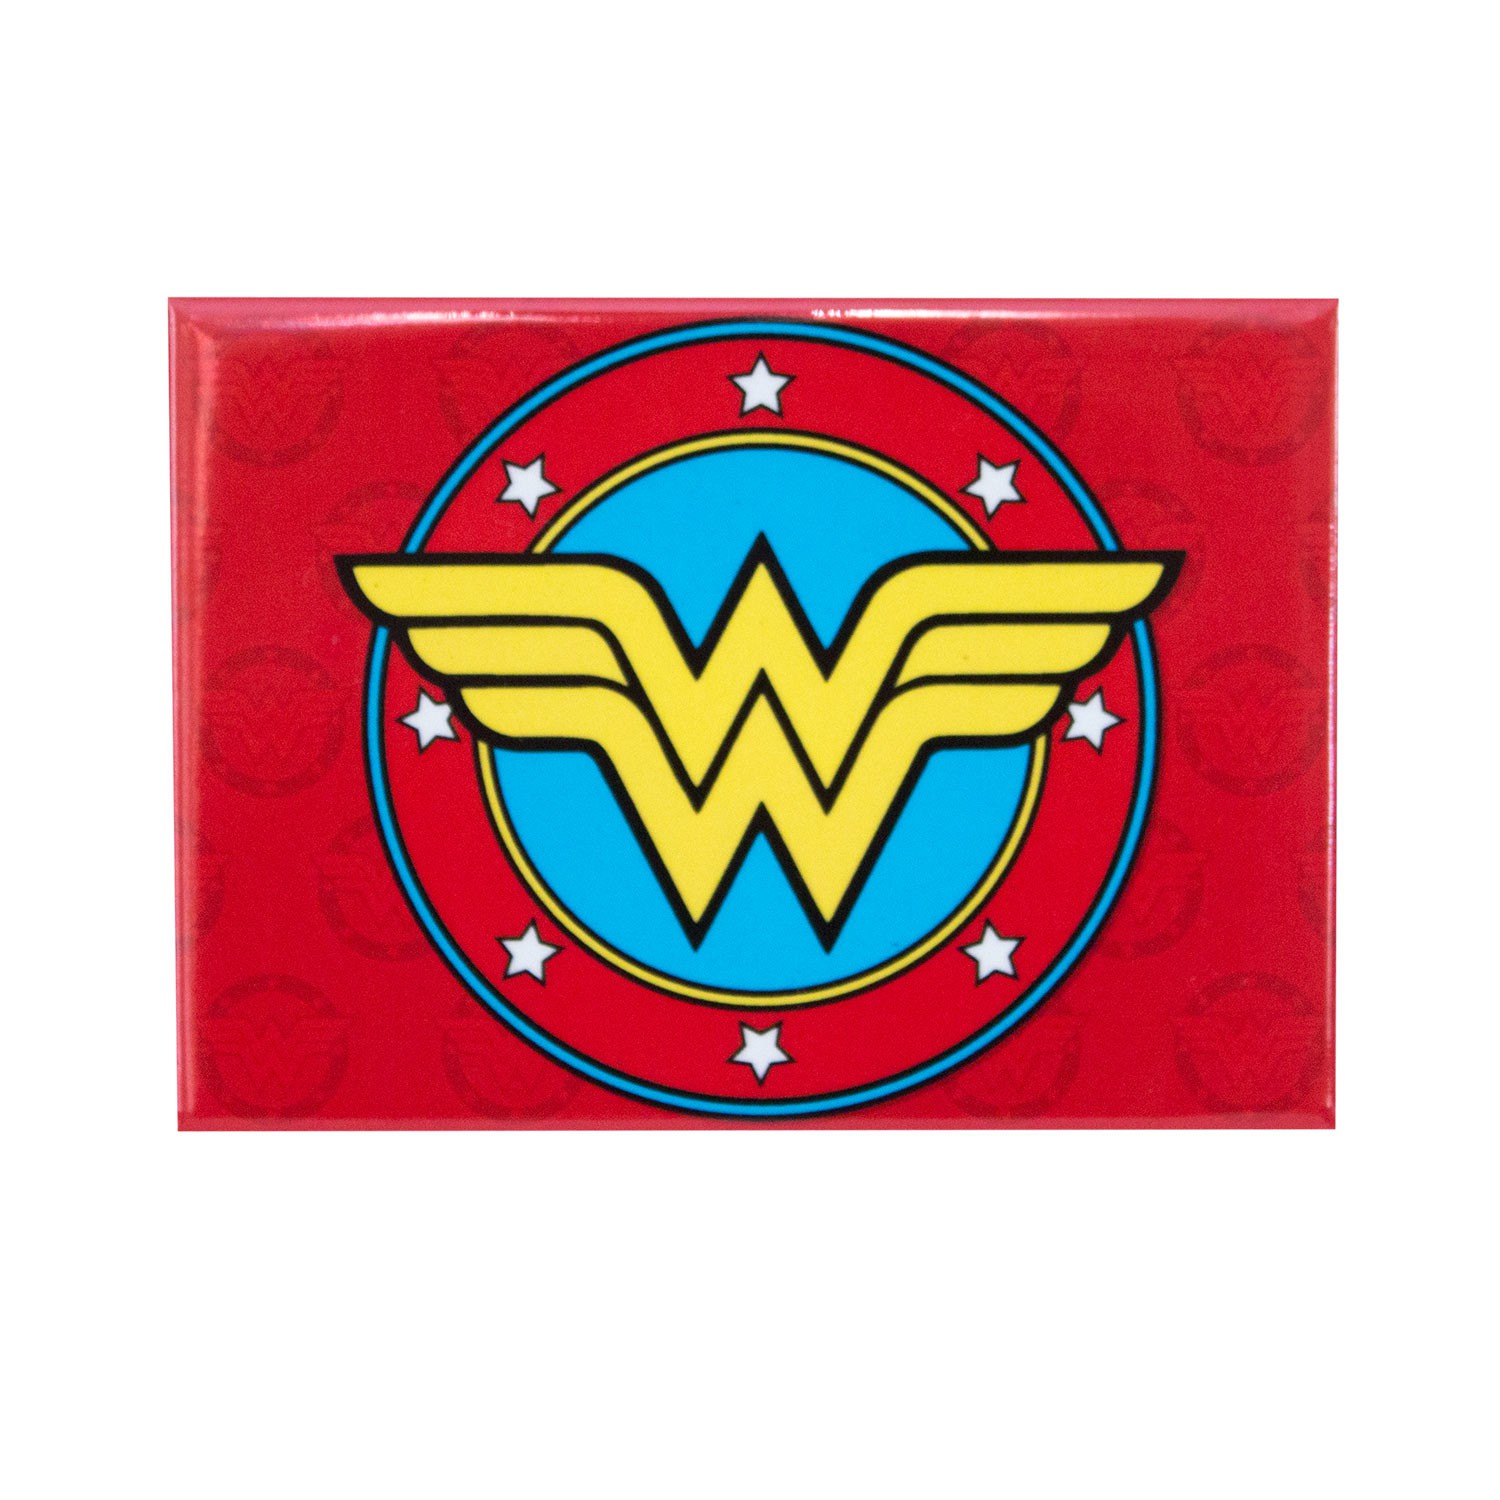 Wonder Woman on Red Magnet 3.5" x 2.5" officially licensed 